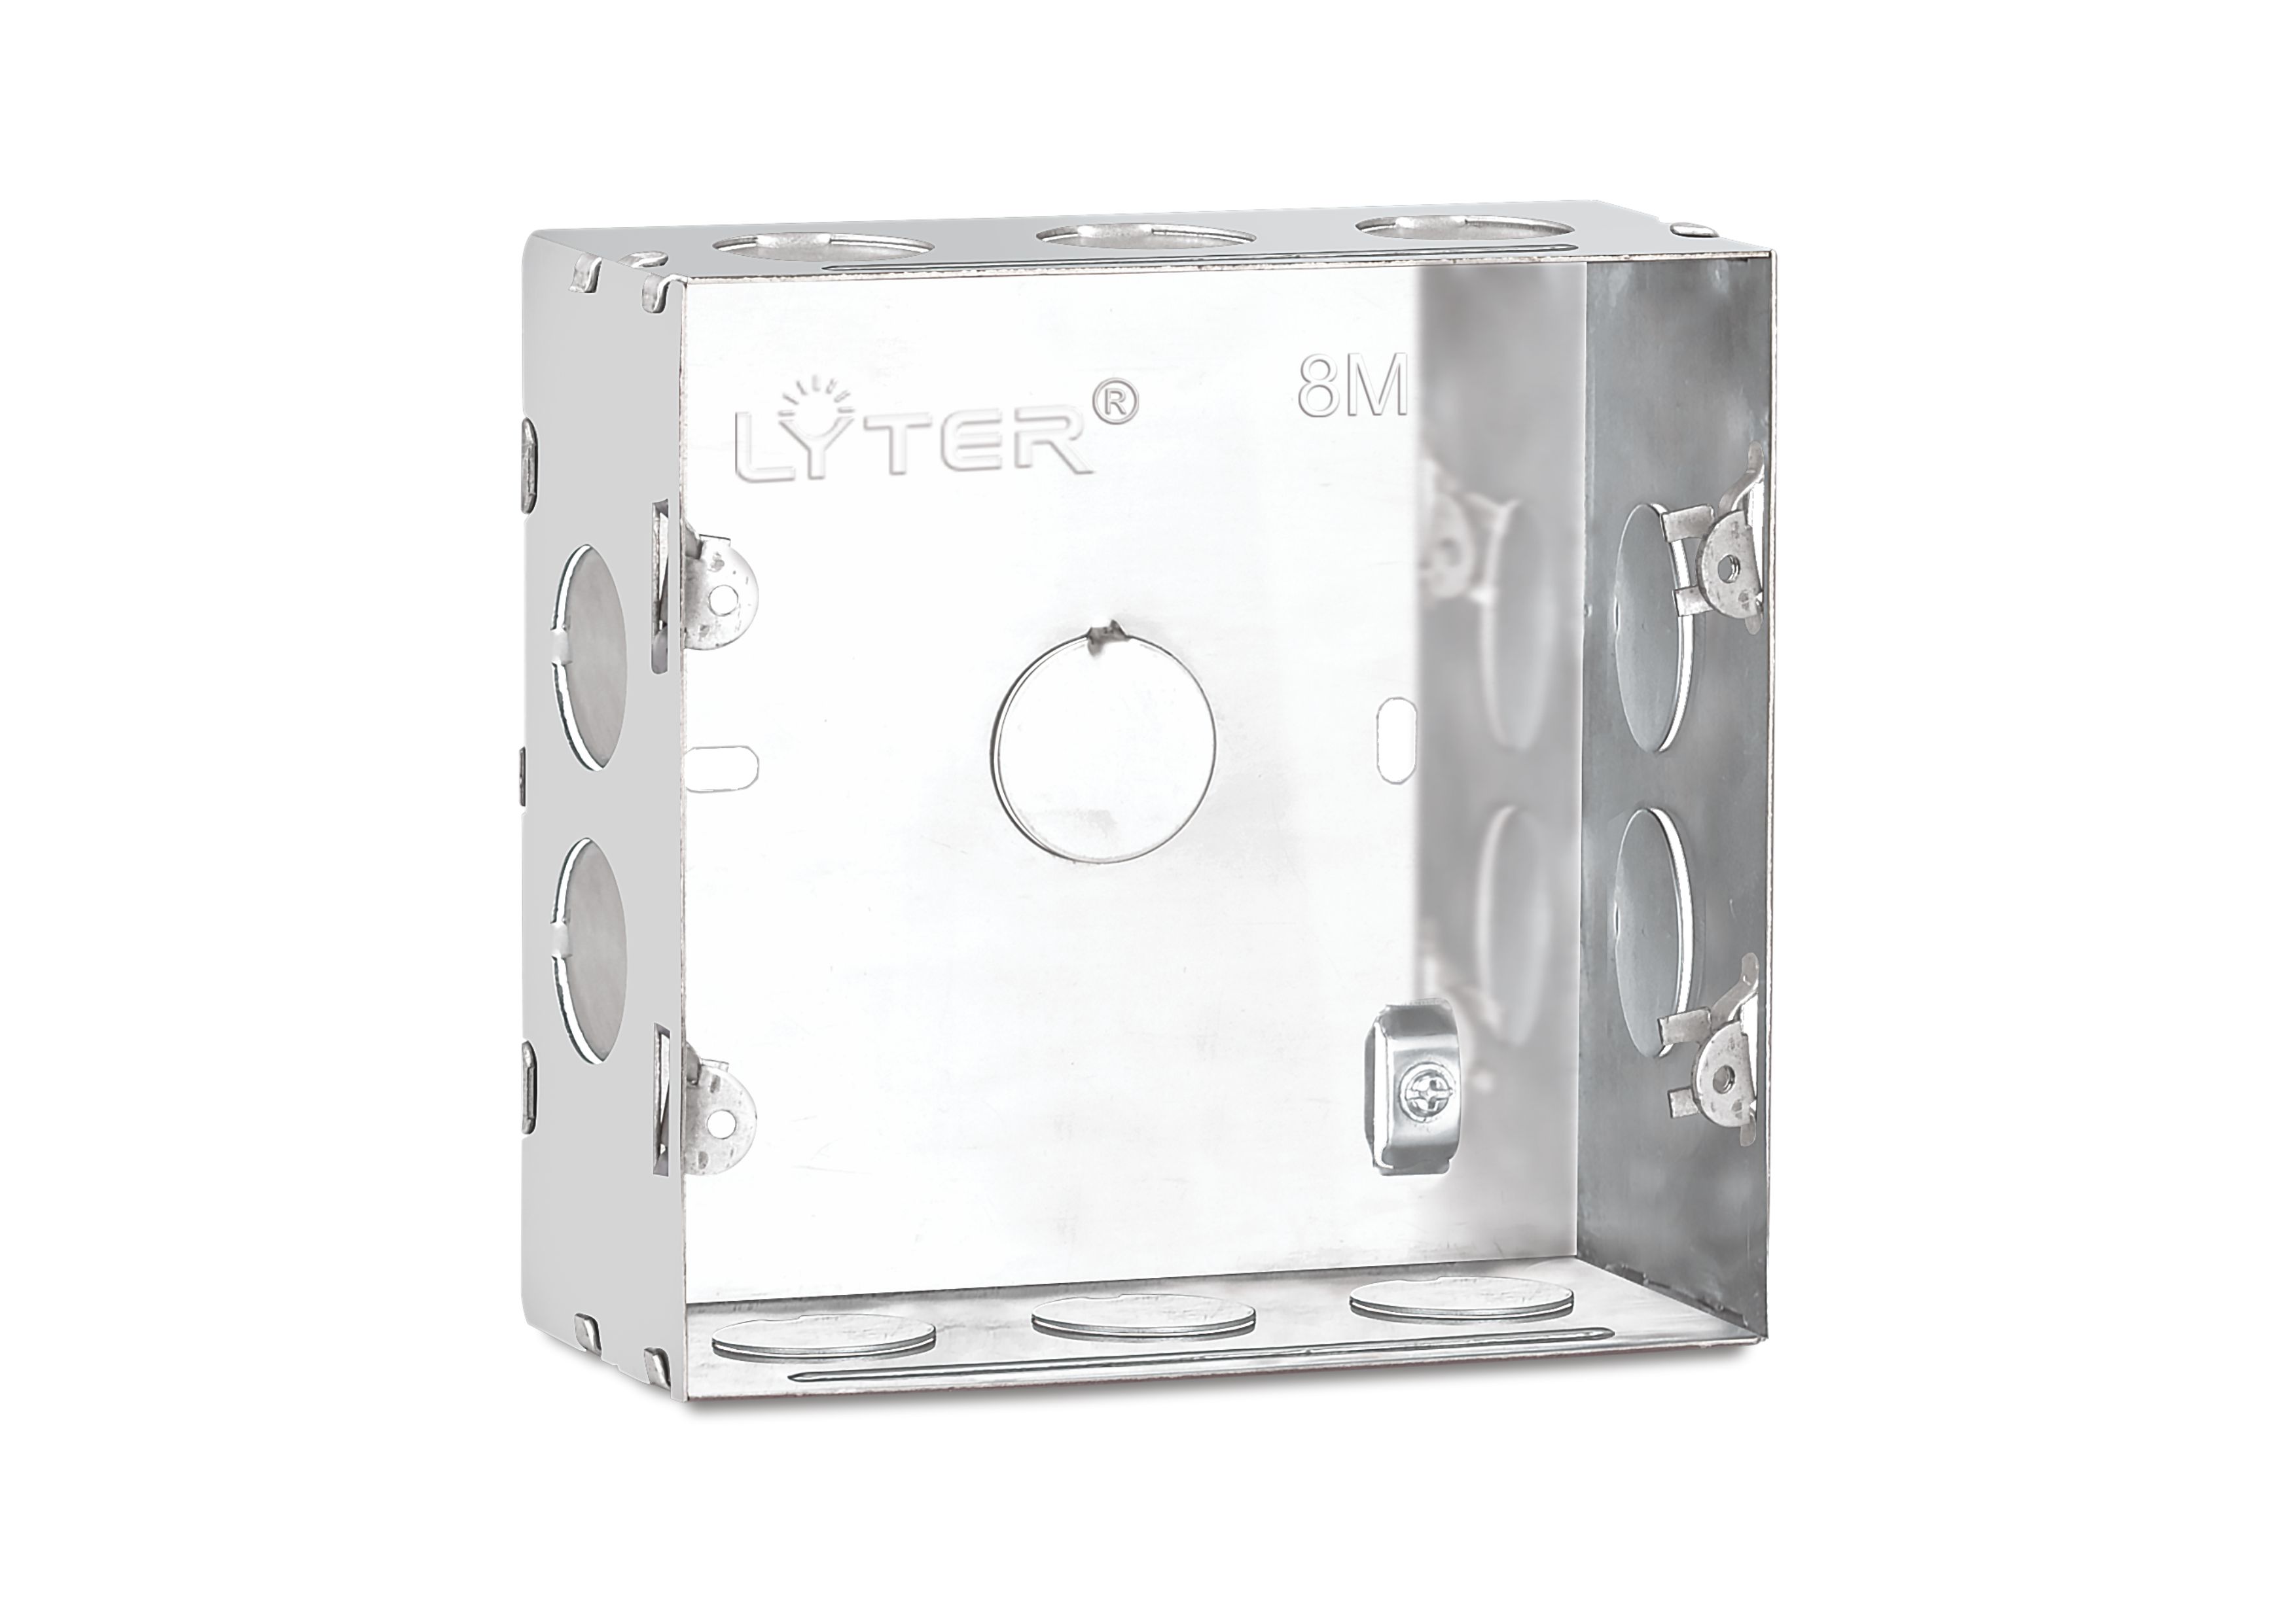 8 M (V) FLUSH MOUNTING METAL GANG BOXES (STAINLESS STEEL - SS)